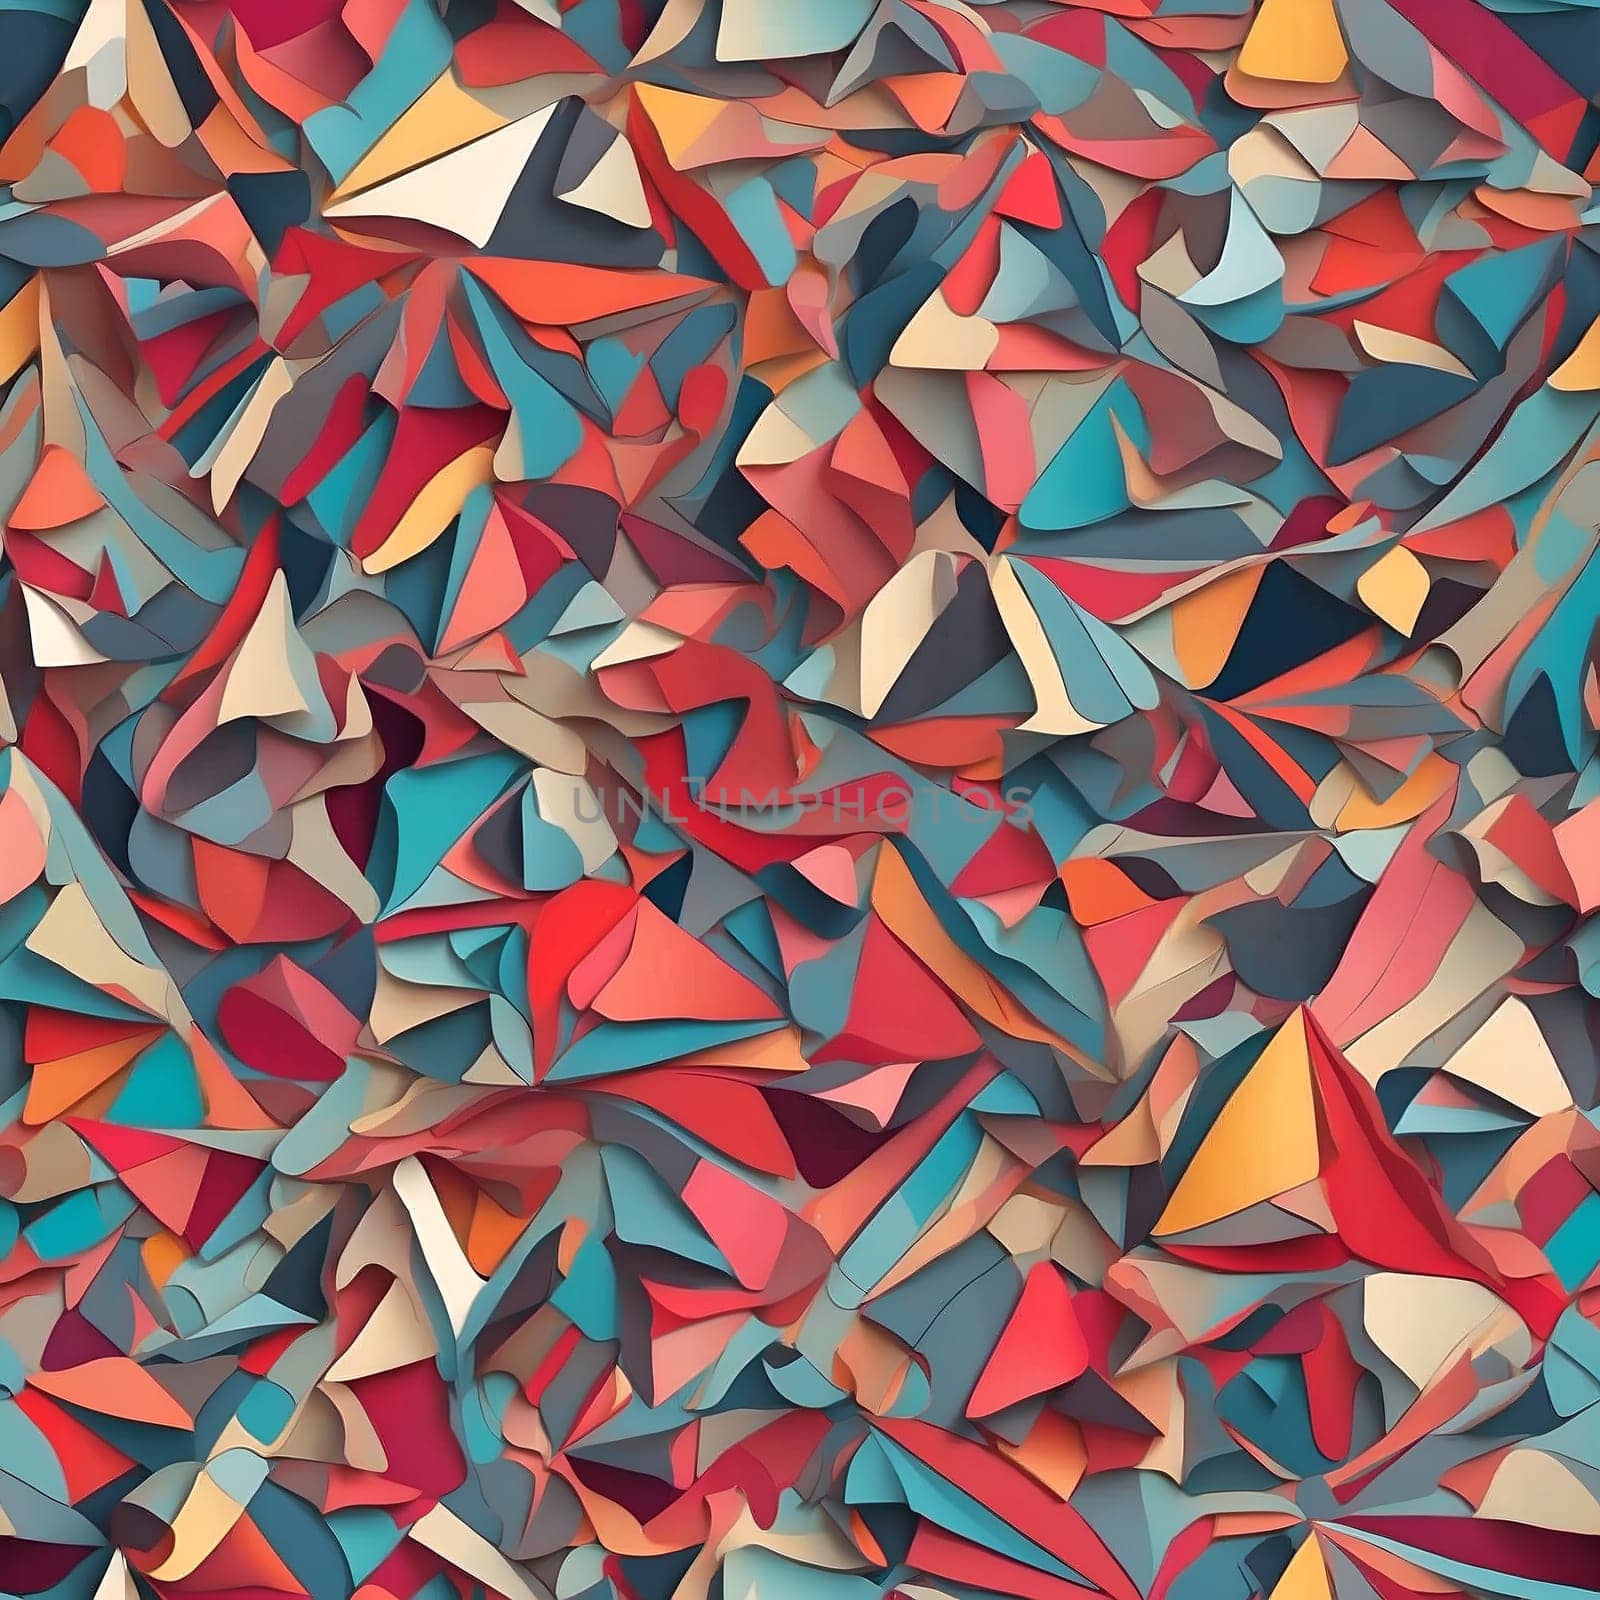 A vibrant and visually engaging seamless pattern featuring a multitude of colorful paper shapes.